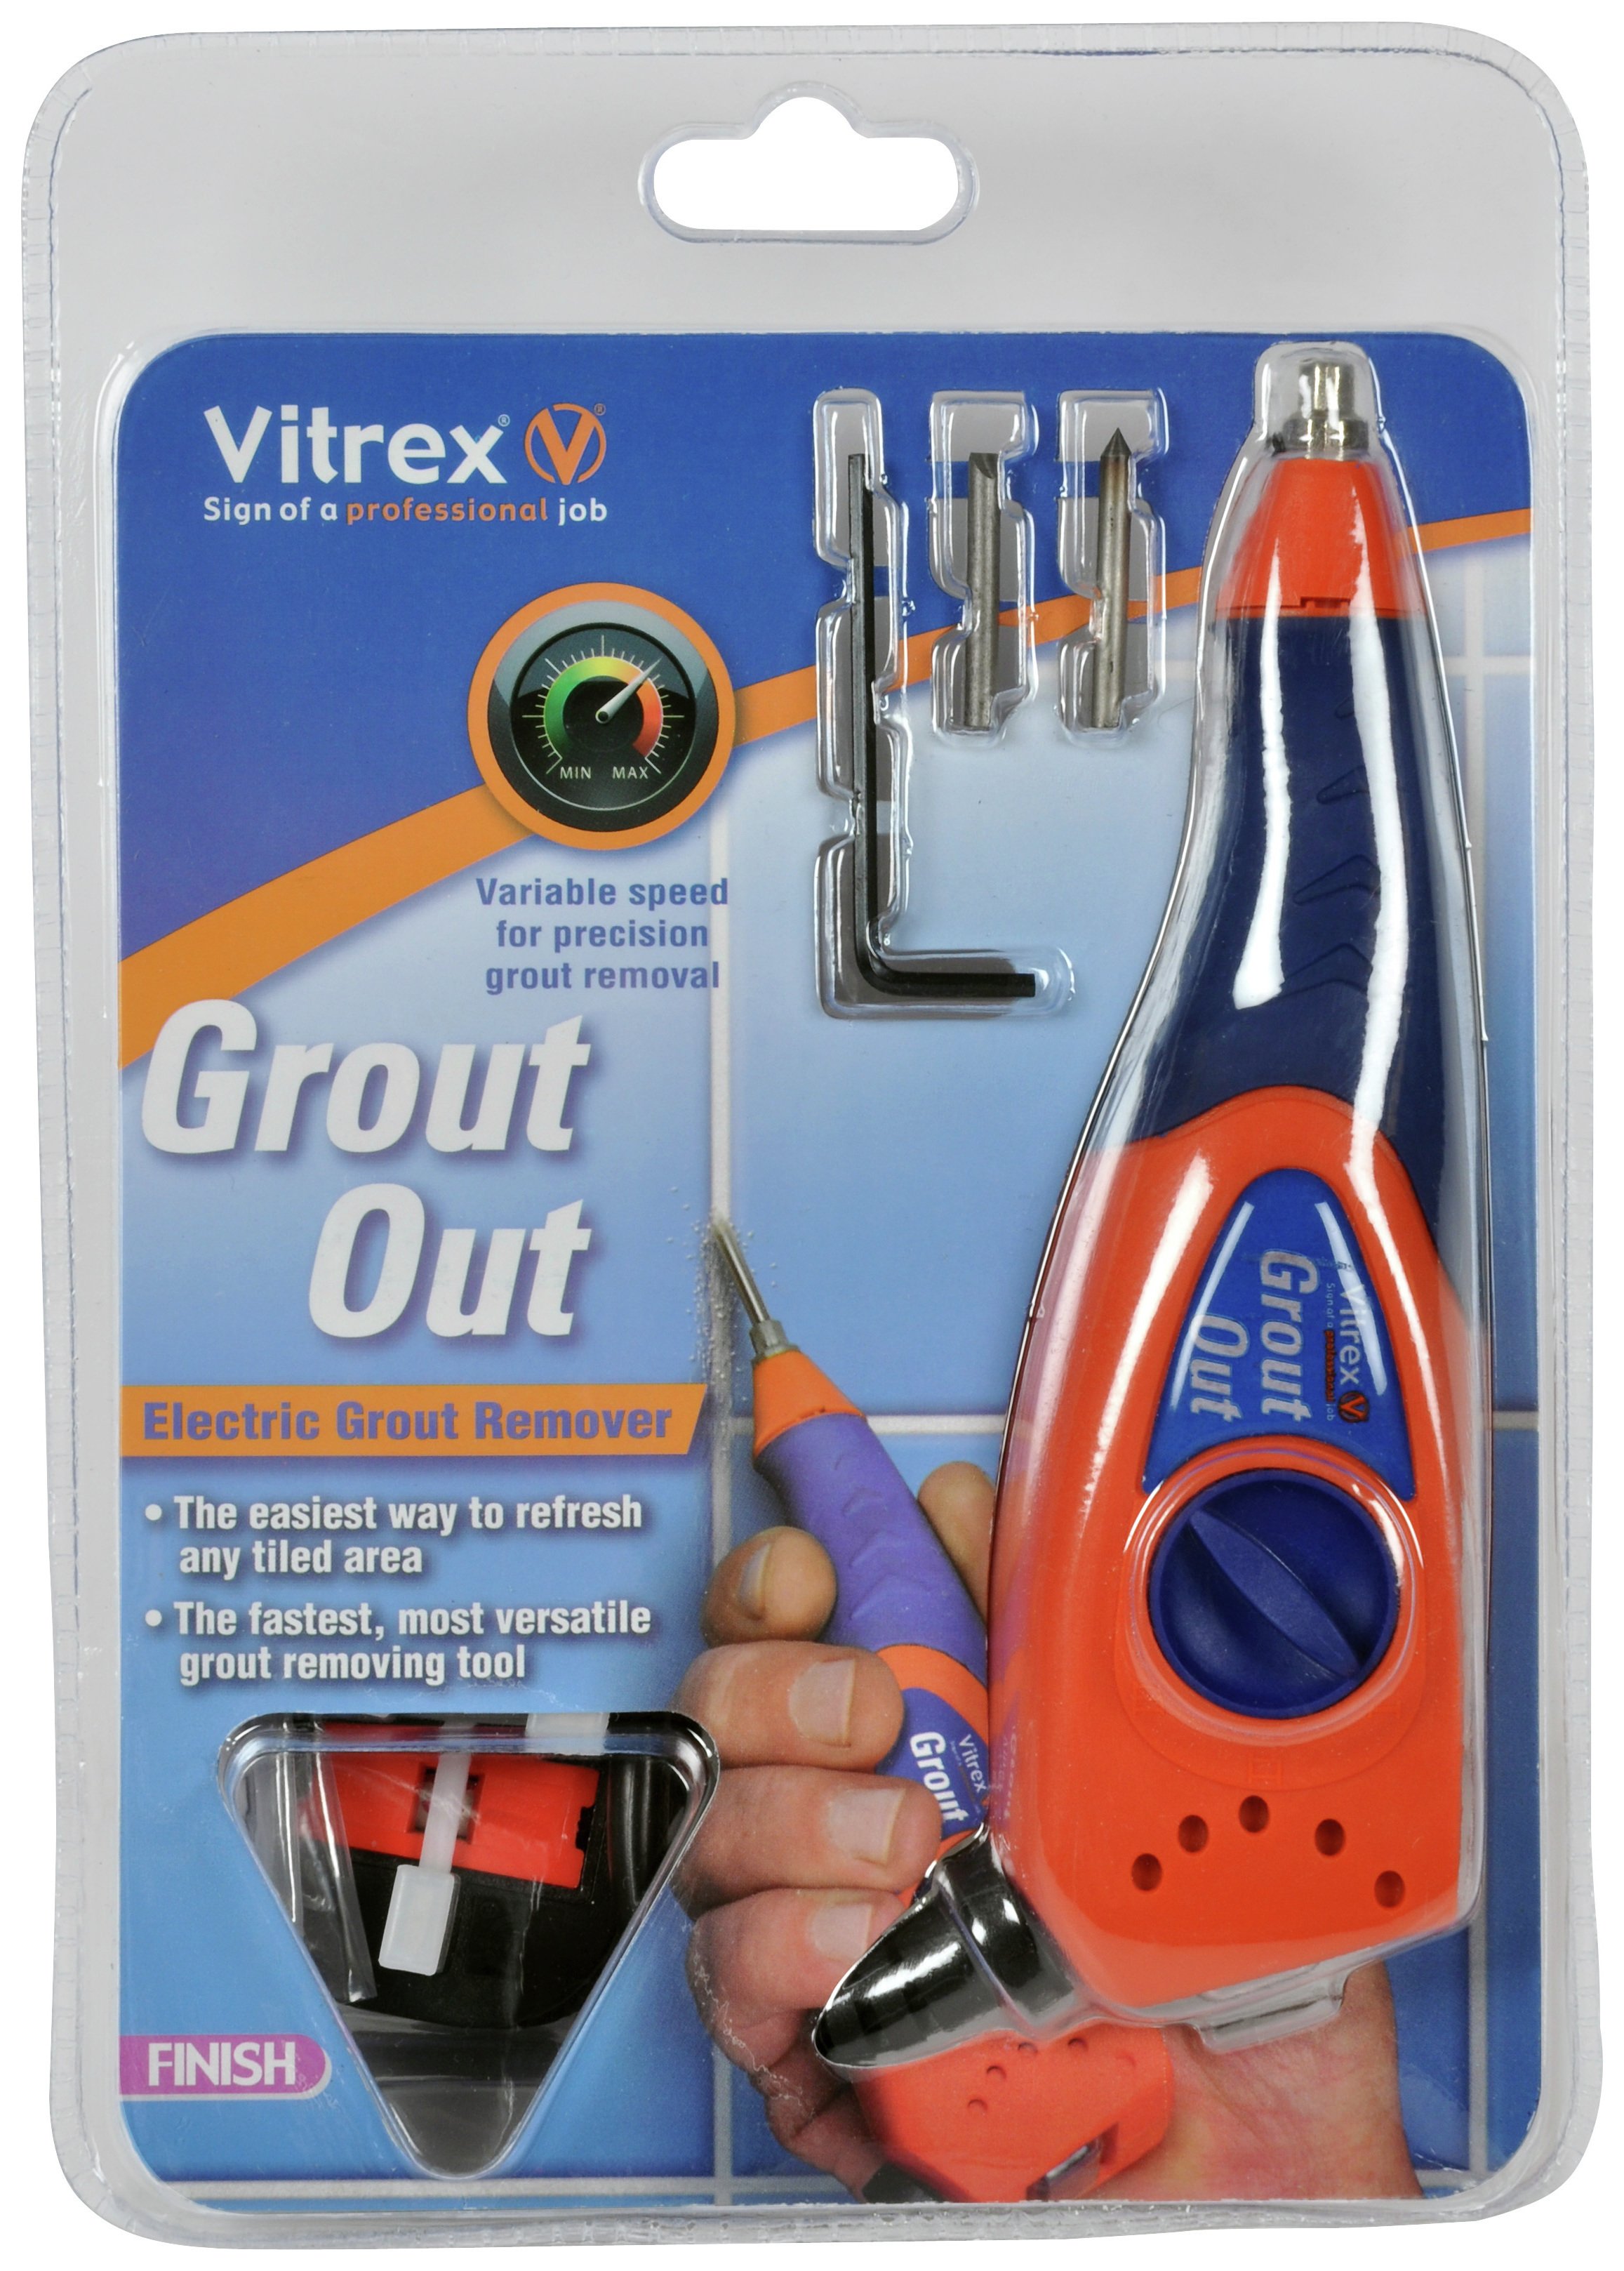 Vitrex GO200VT Grout Out Electric Corded Grout Remover